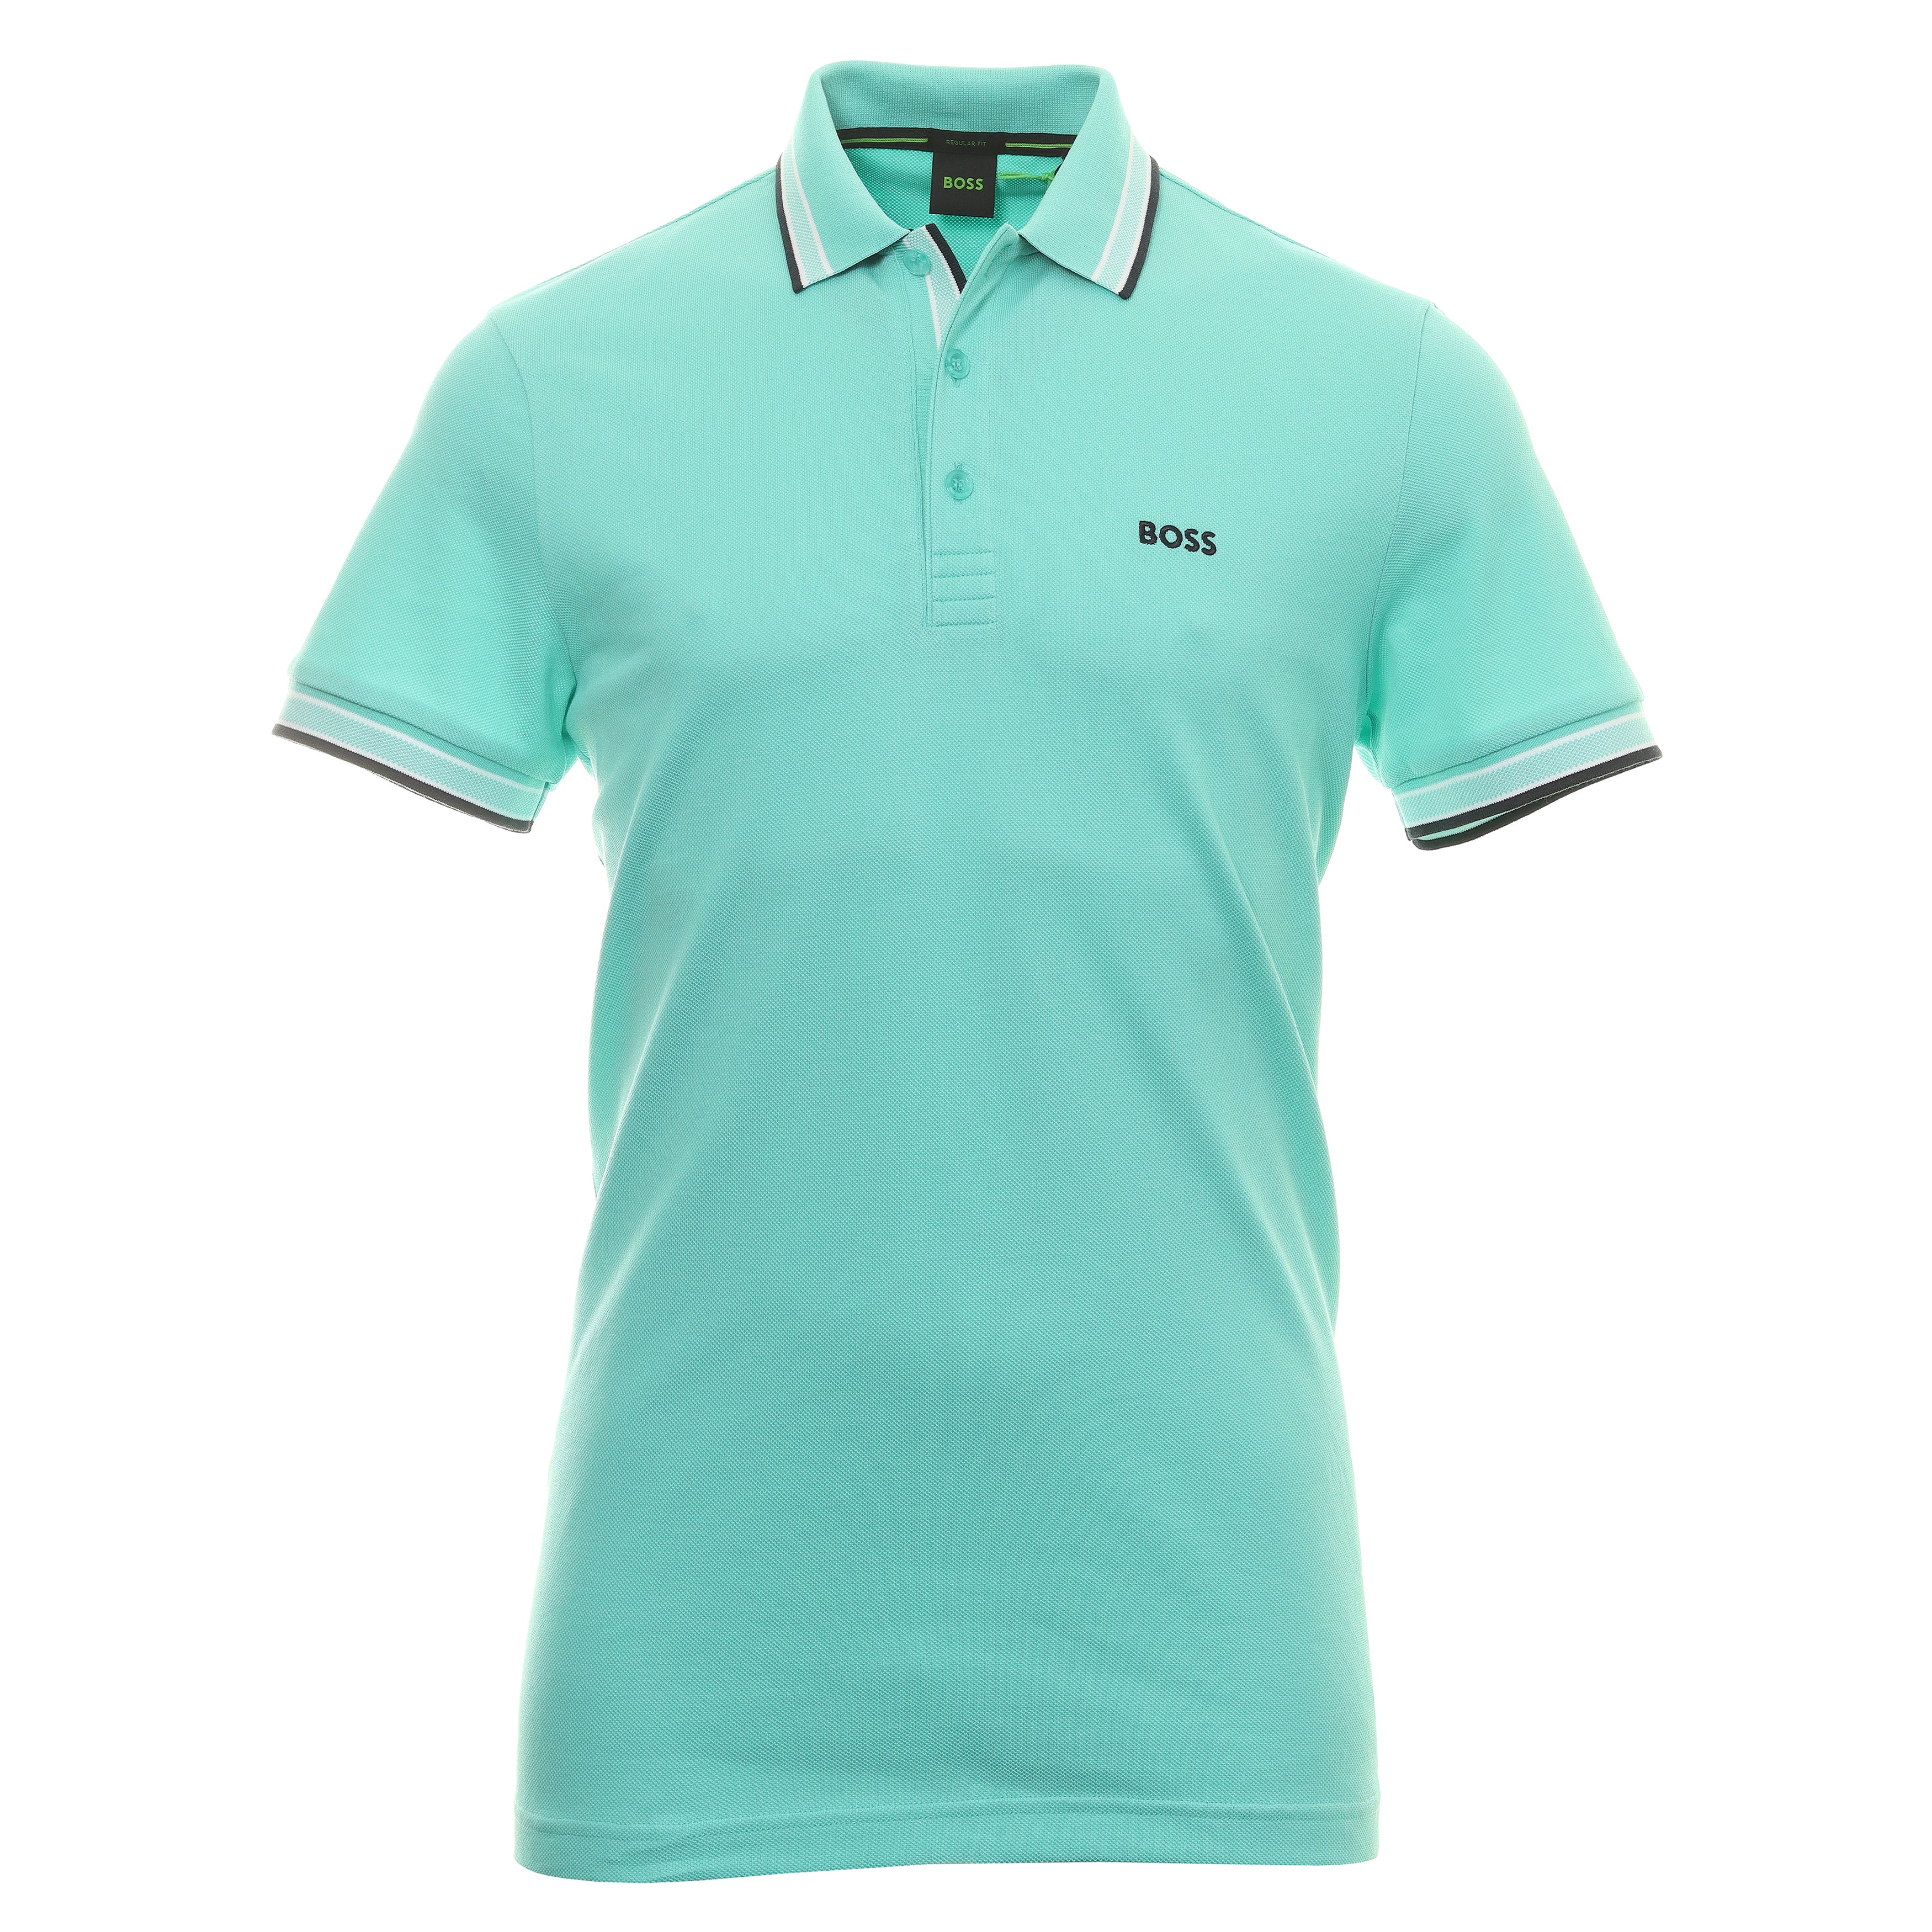 BOSS Paddy Polo Shirt 50468983 Cockatoo 340 | Function18 | Restrictedgs